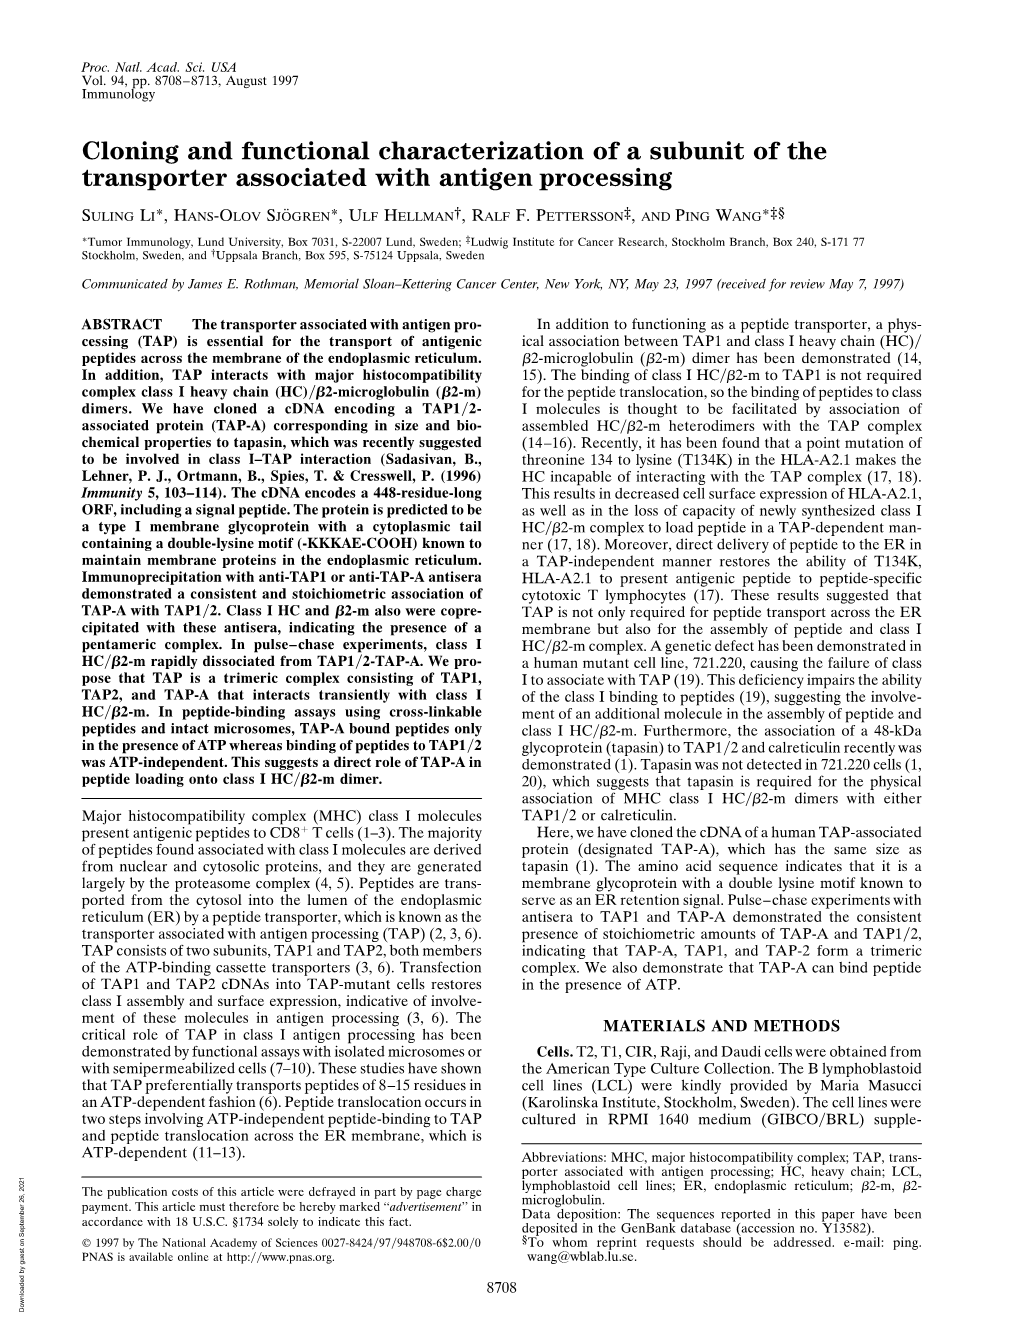 Cloning and Functional Characterization of a Subunit of the Transporter Associated with Antigen Processing